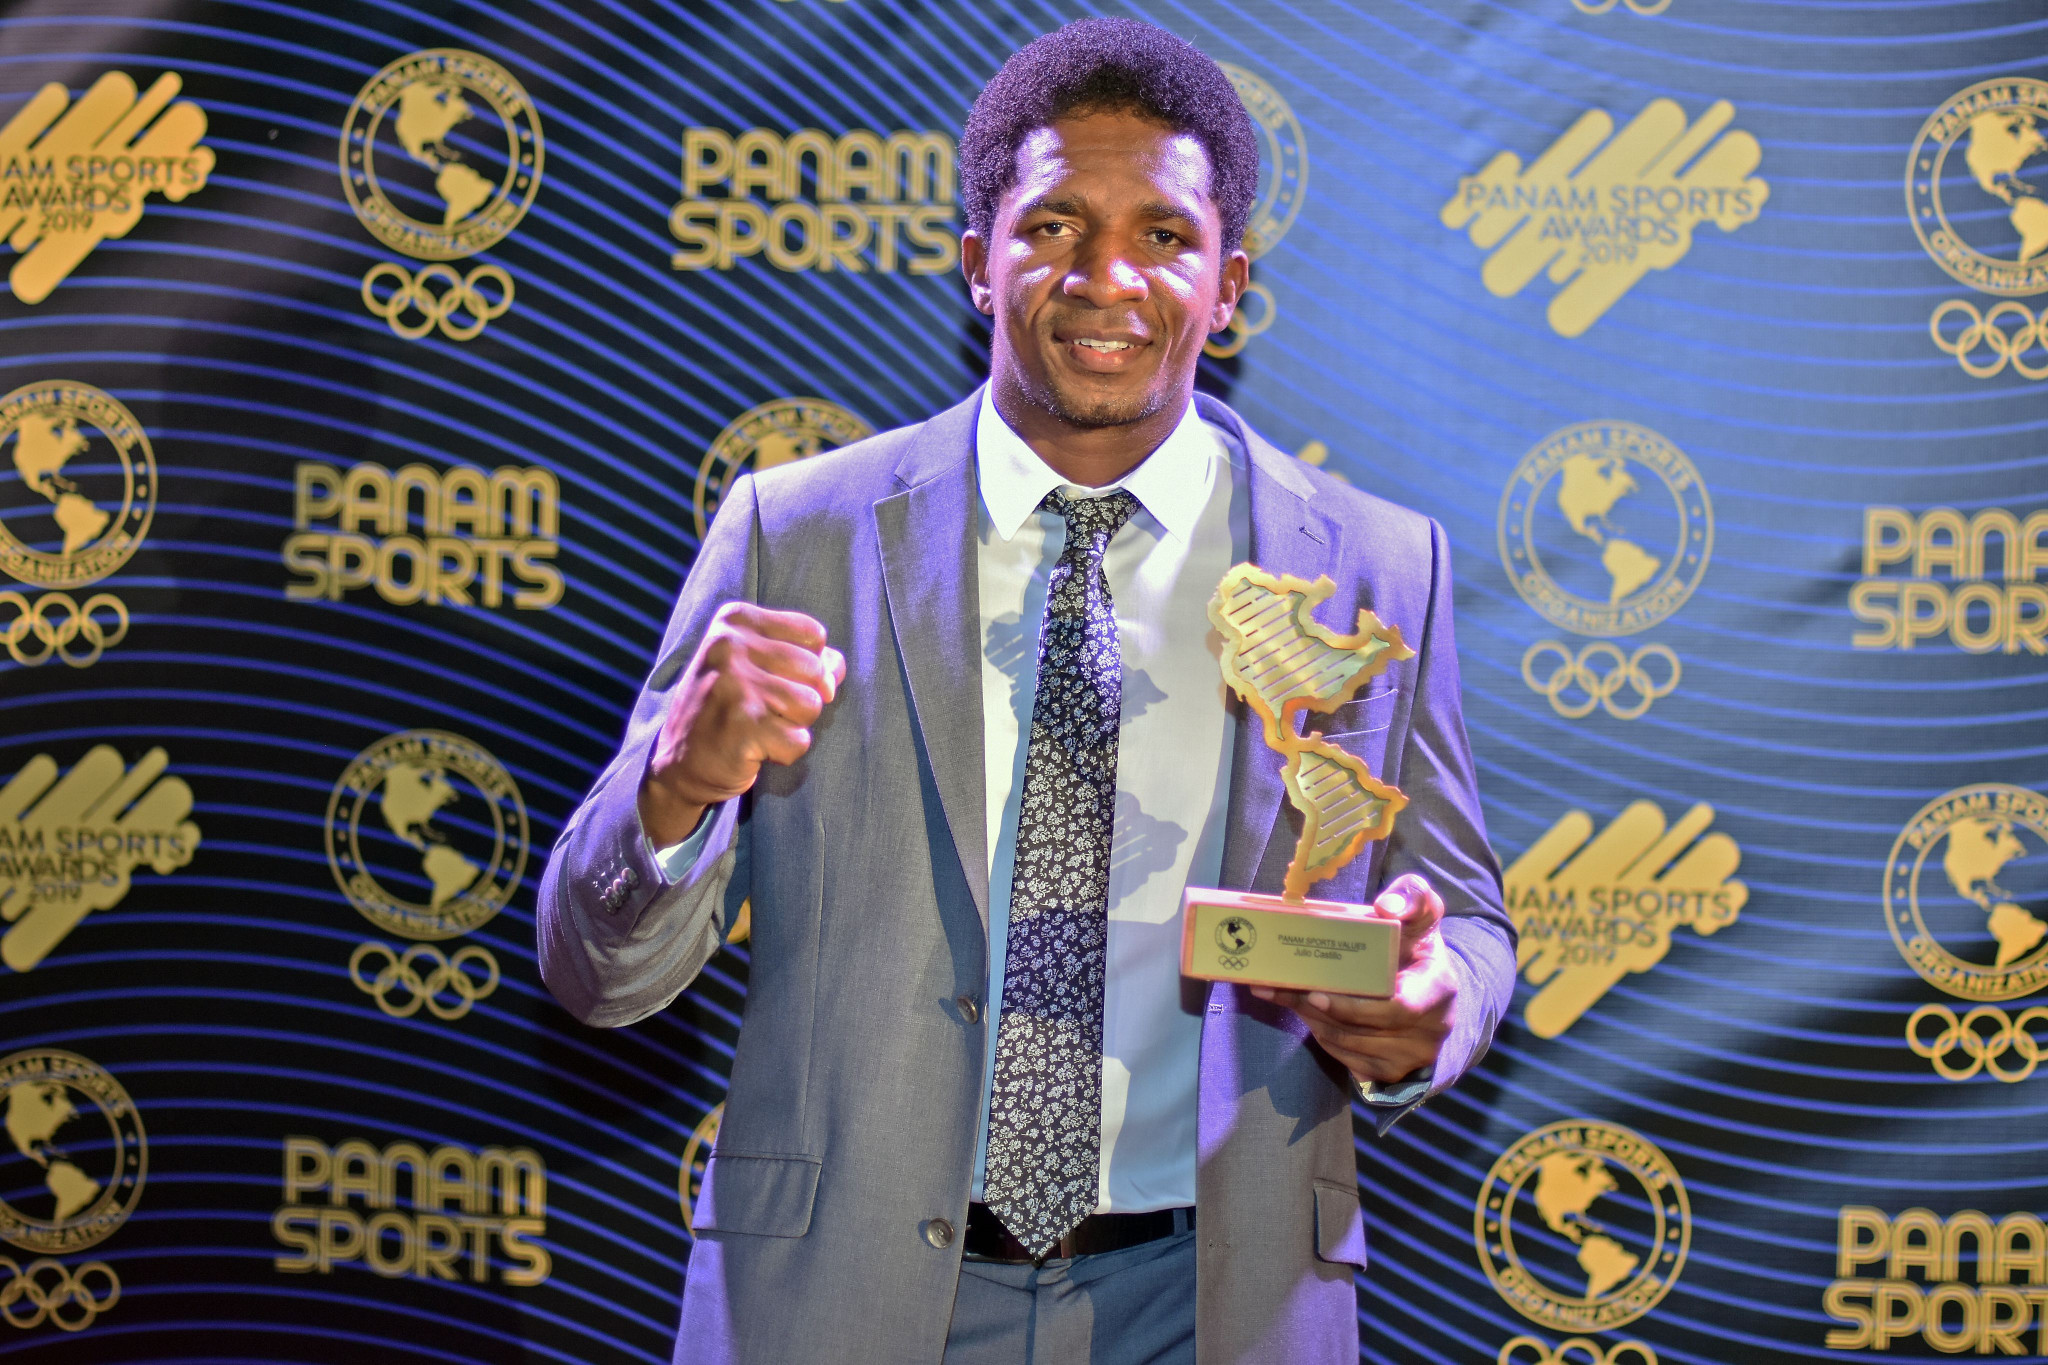 Ecuadorian boxer Julio Castillo was named winner of the Panam Sports Values Award ©Getty Images